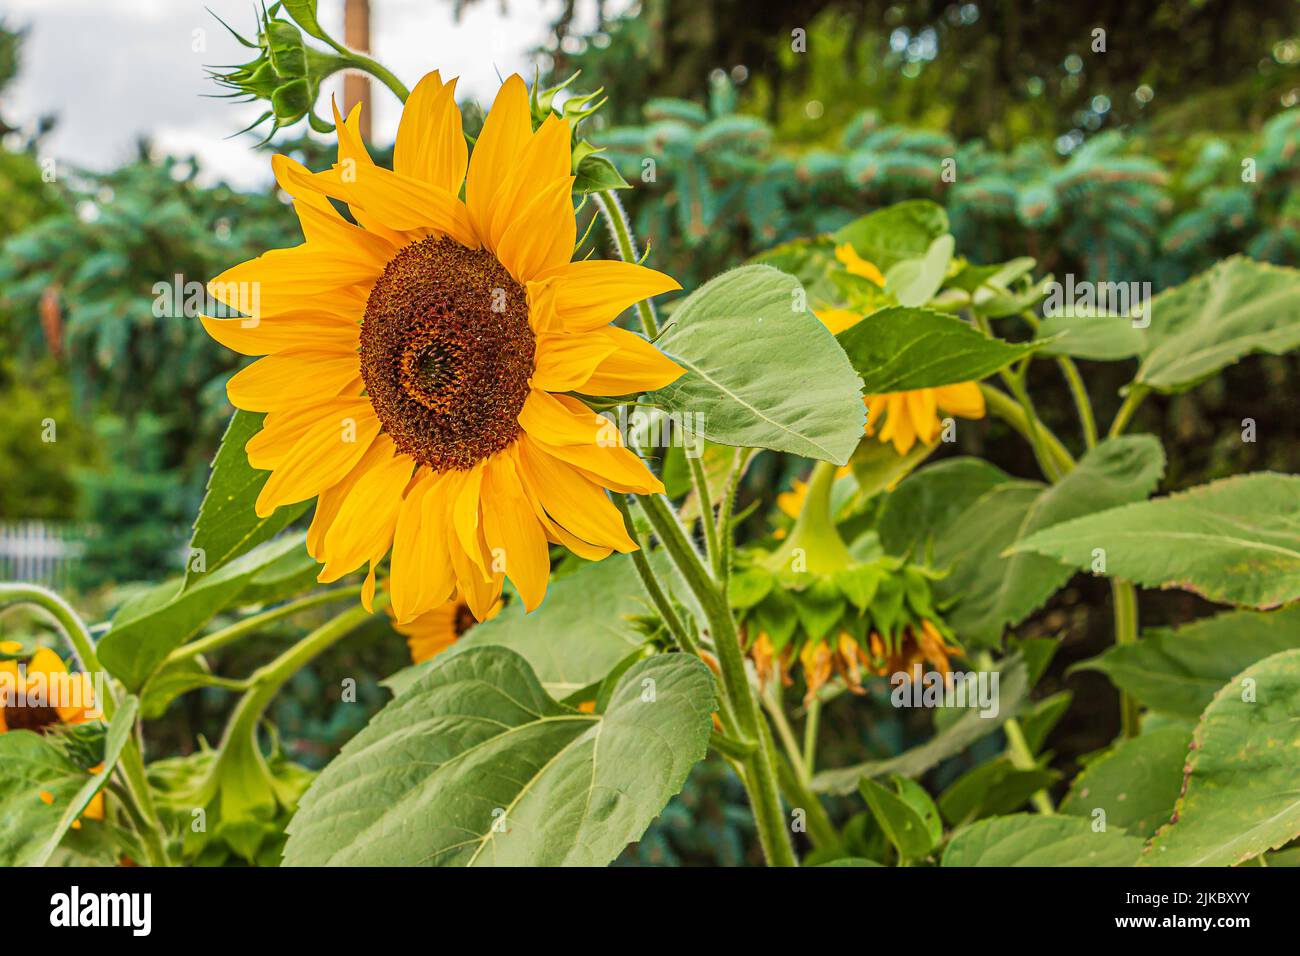 Sunflower in summer with bright yellow petals. Details of a flower open blossom. Sunflower seeds inside the flower head. Plant stem and green leaves Stock Photo